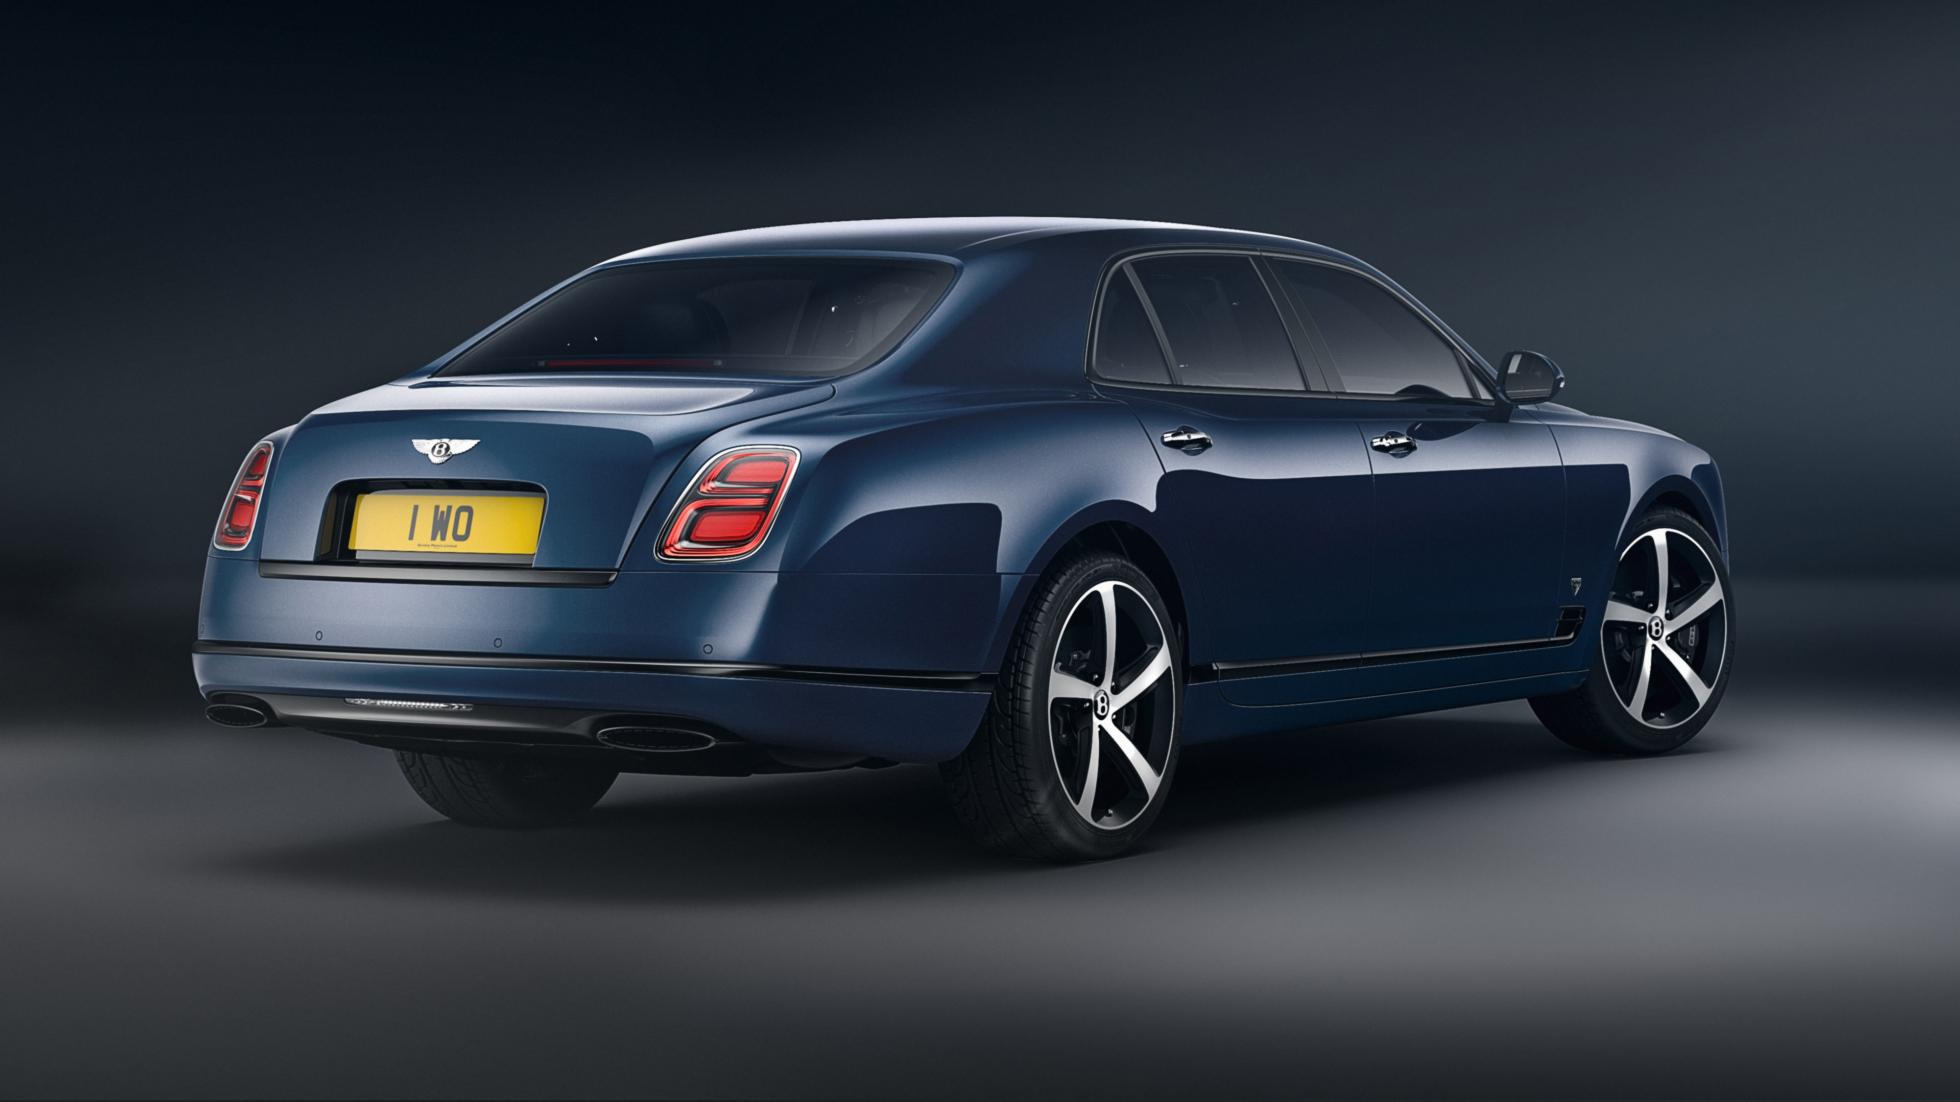 Why did Bentley kill off the Mulsanne?